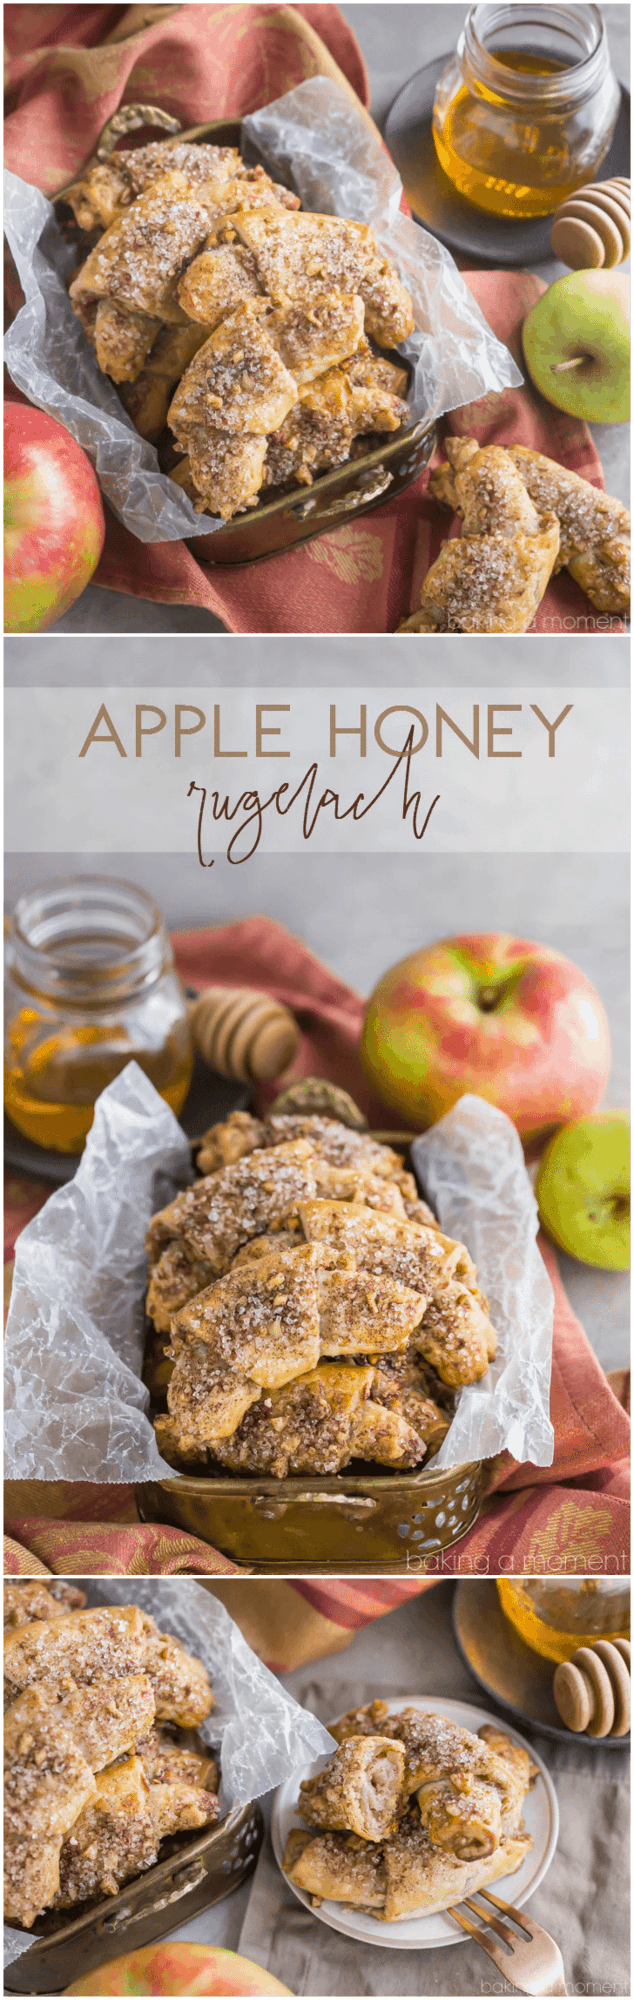 Apple Honey Rugelach: tender cream cheese pastries filled with charoset- an apple/honey/walnut mixture that's perfect for Rosh Hashana or any other fall occasion!